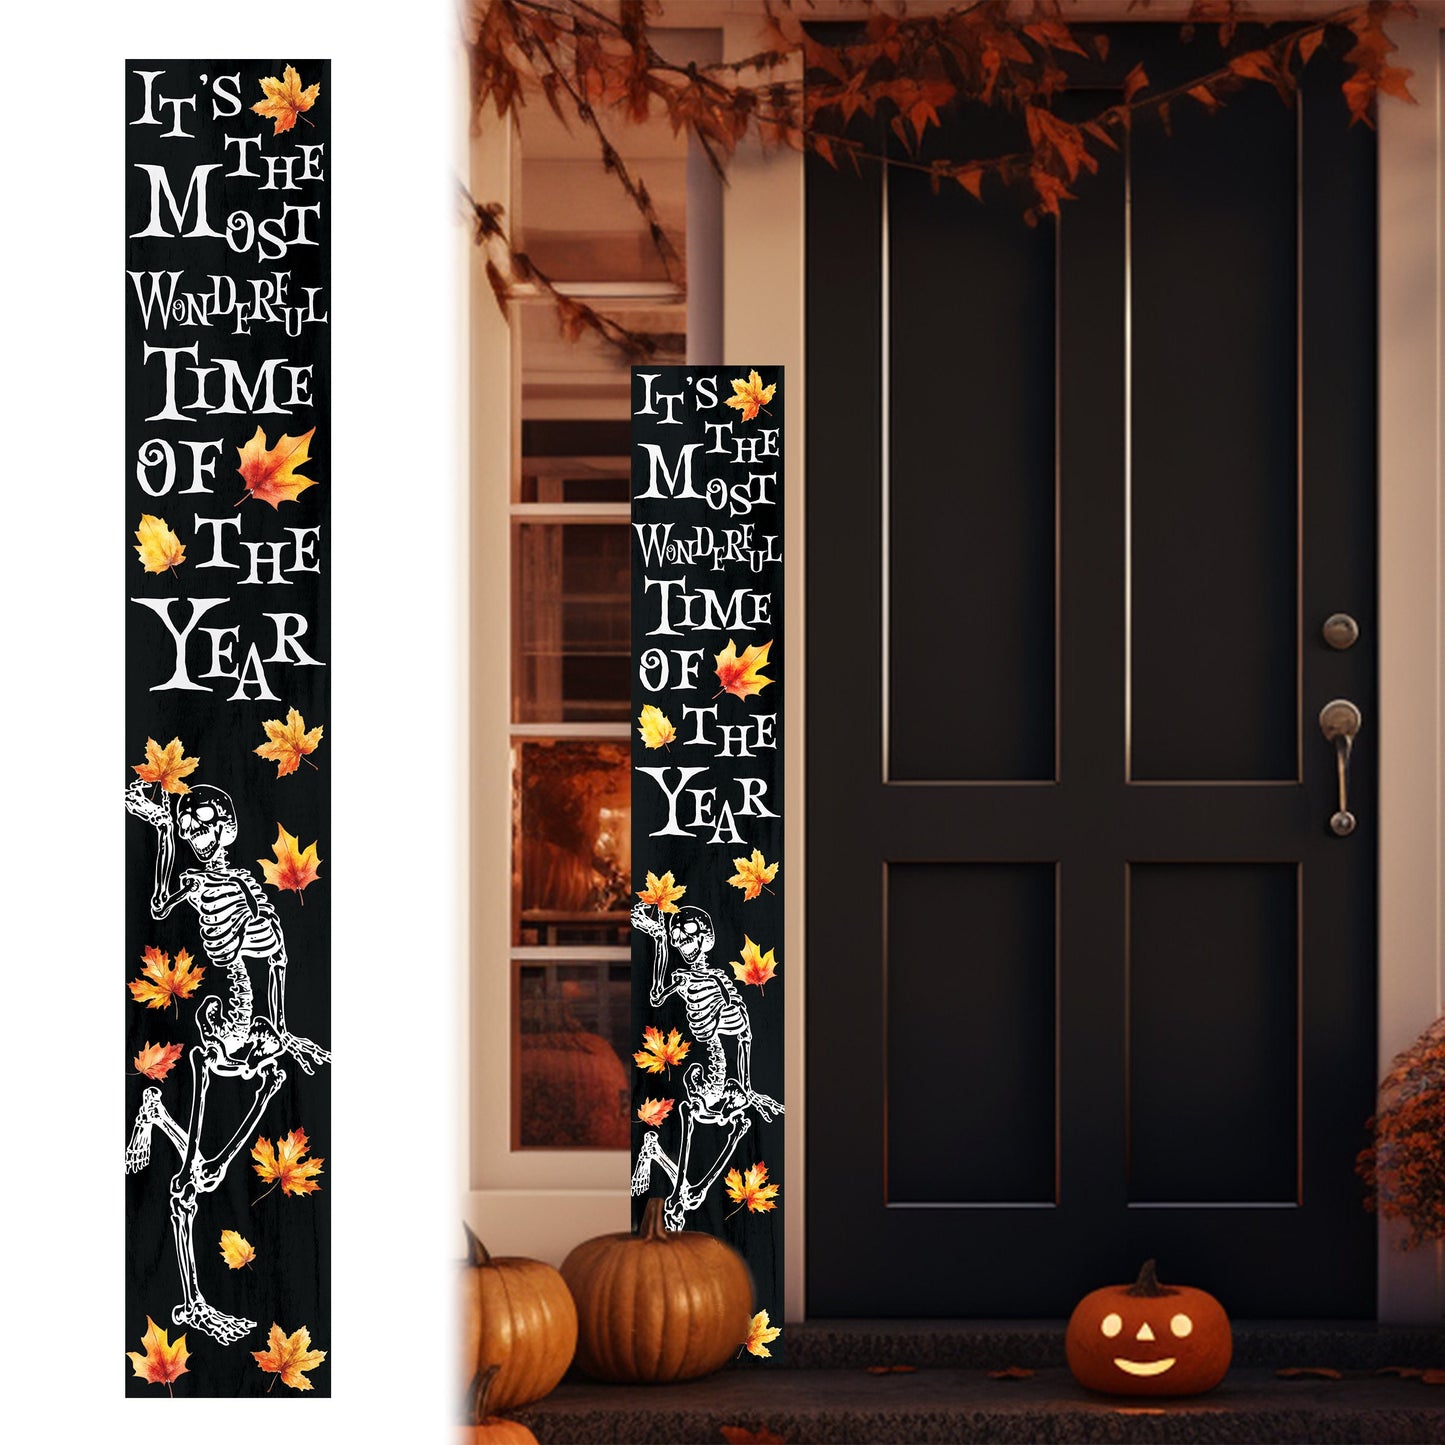 60in Dancing Skeleton Halloween Porch Sign - Front Porch Halloween Welcome Sign, Rustic Modern Farmhouse Entryway Board